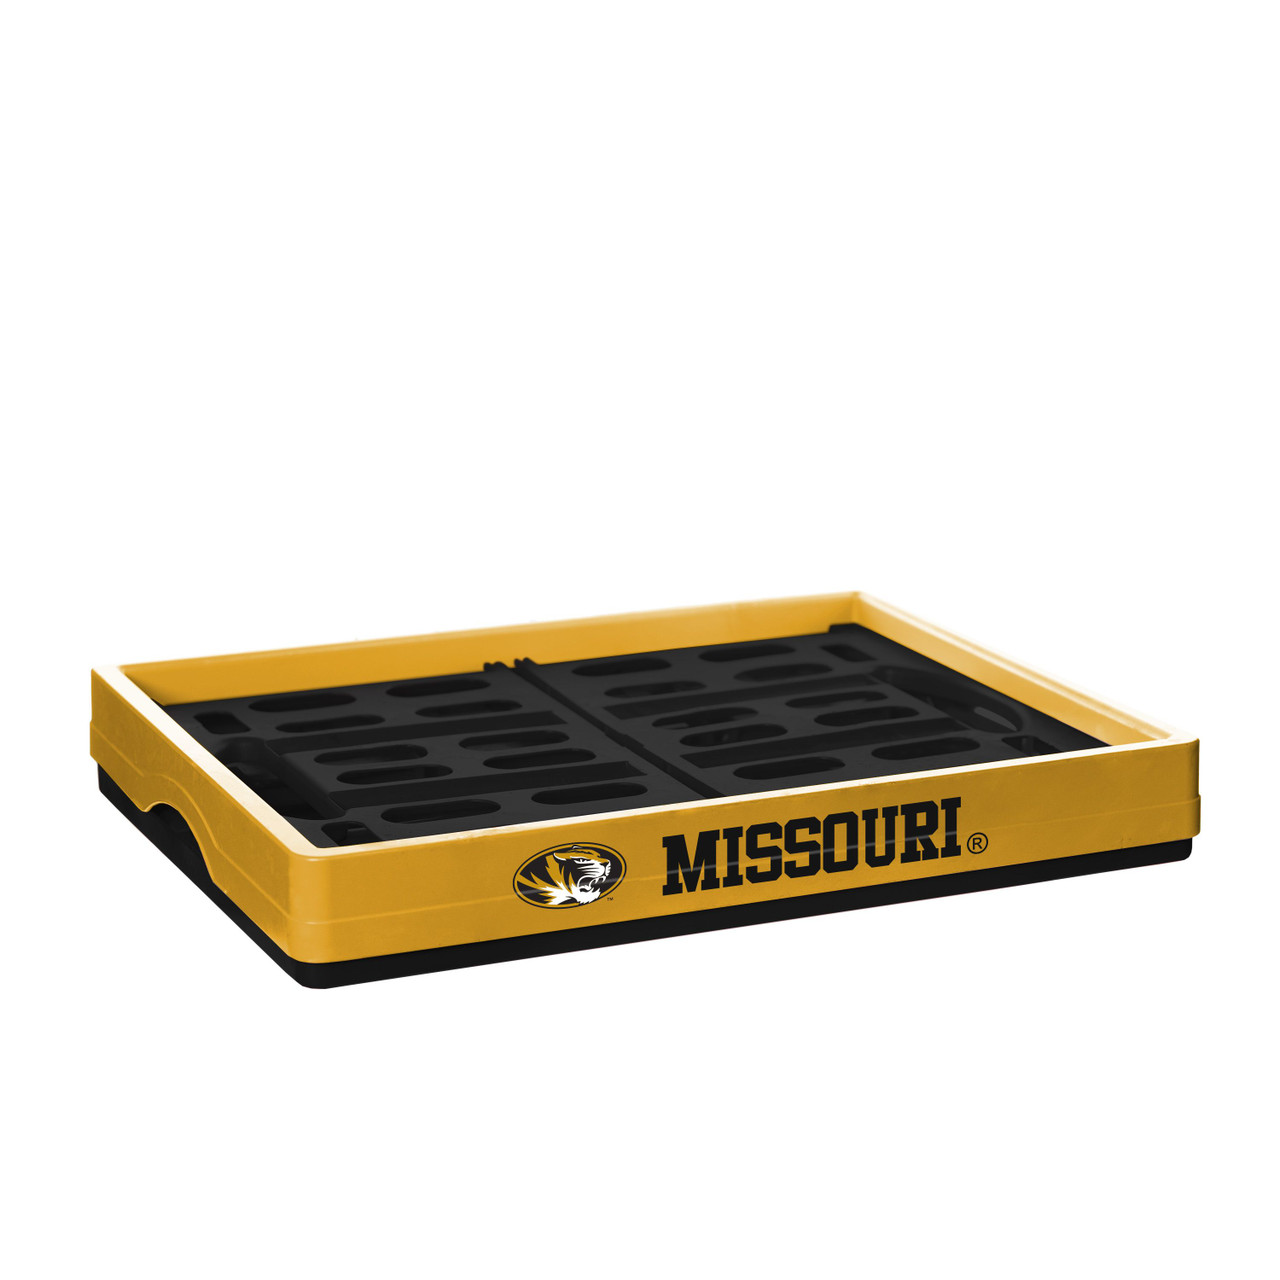 Missouri Tigers Team Collapsible Storage Crate